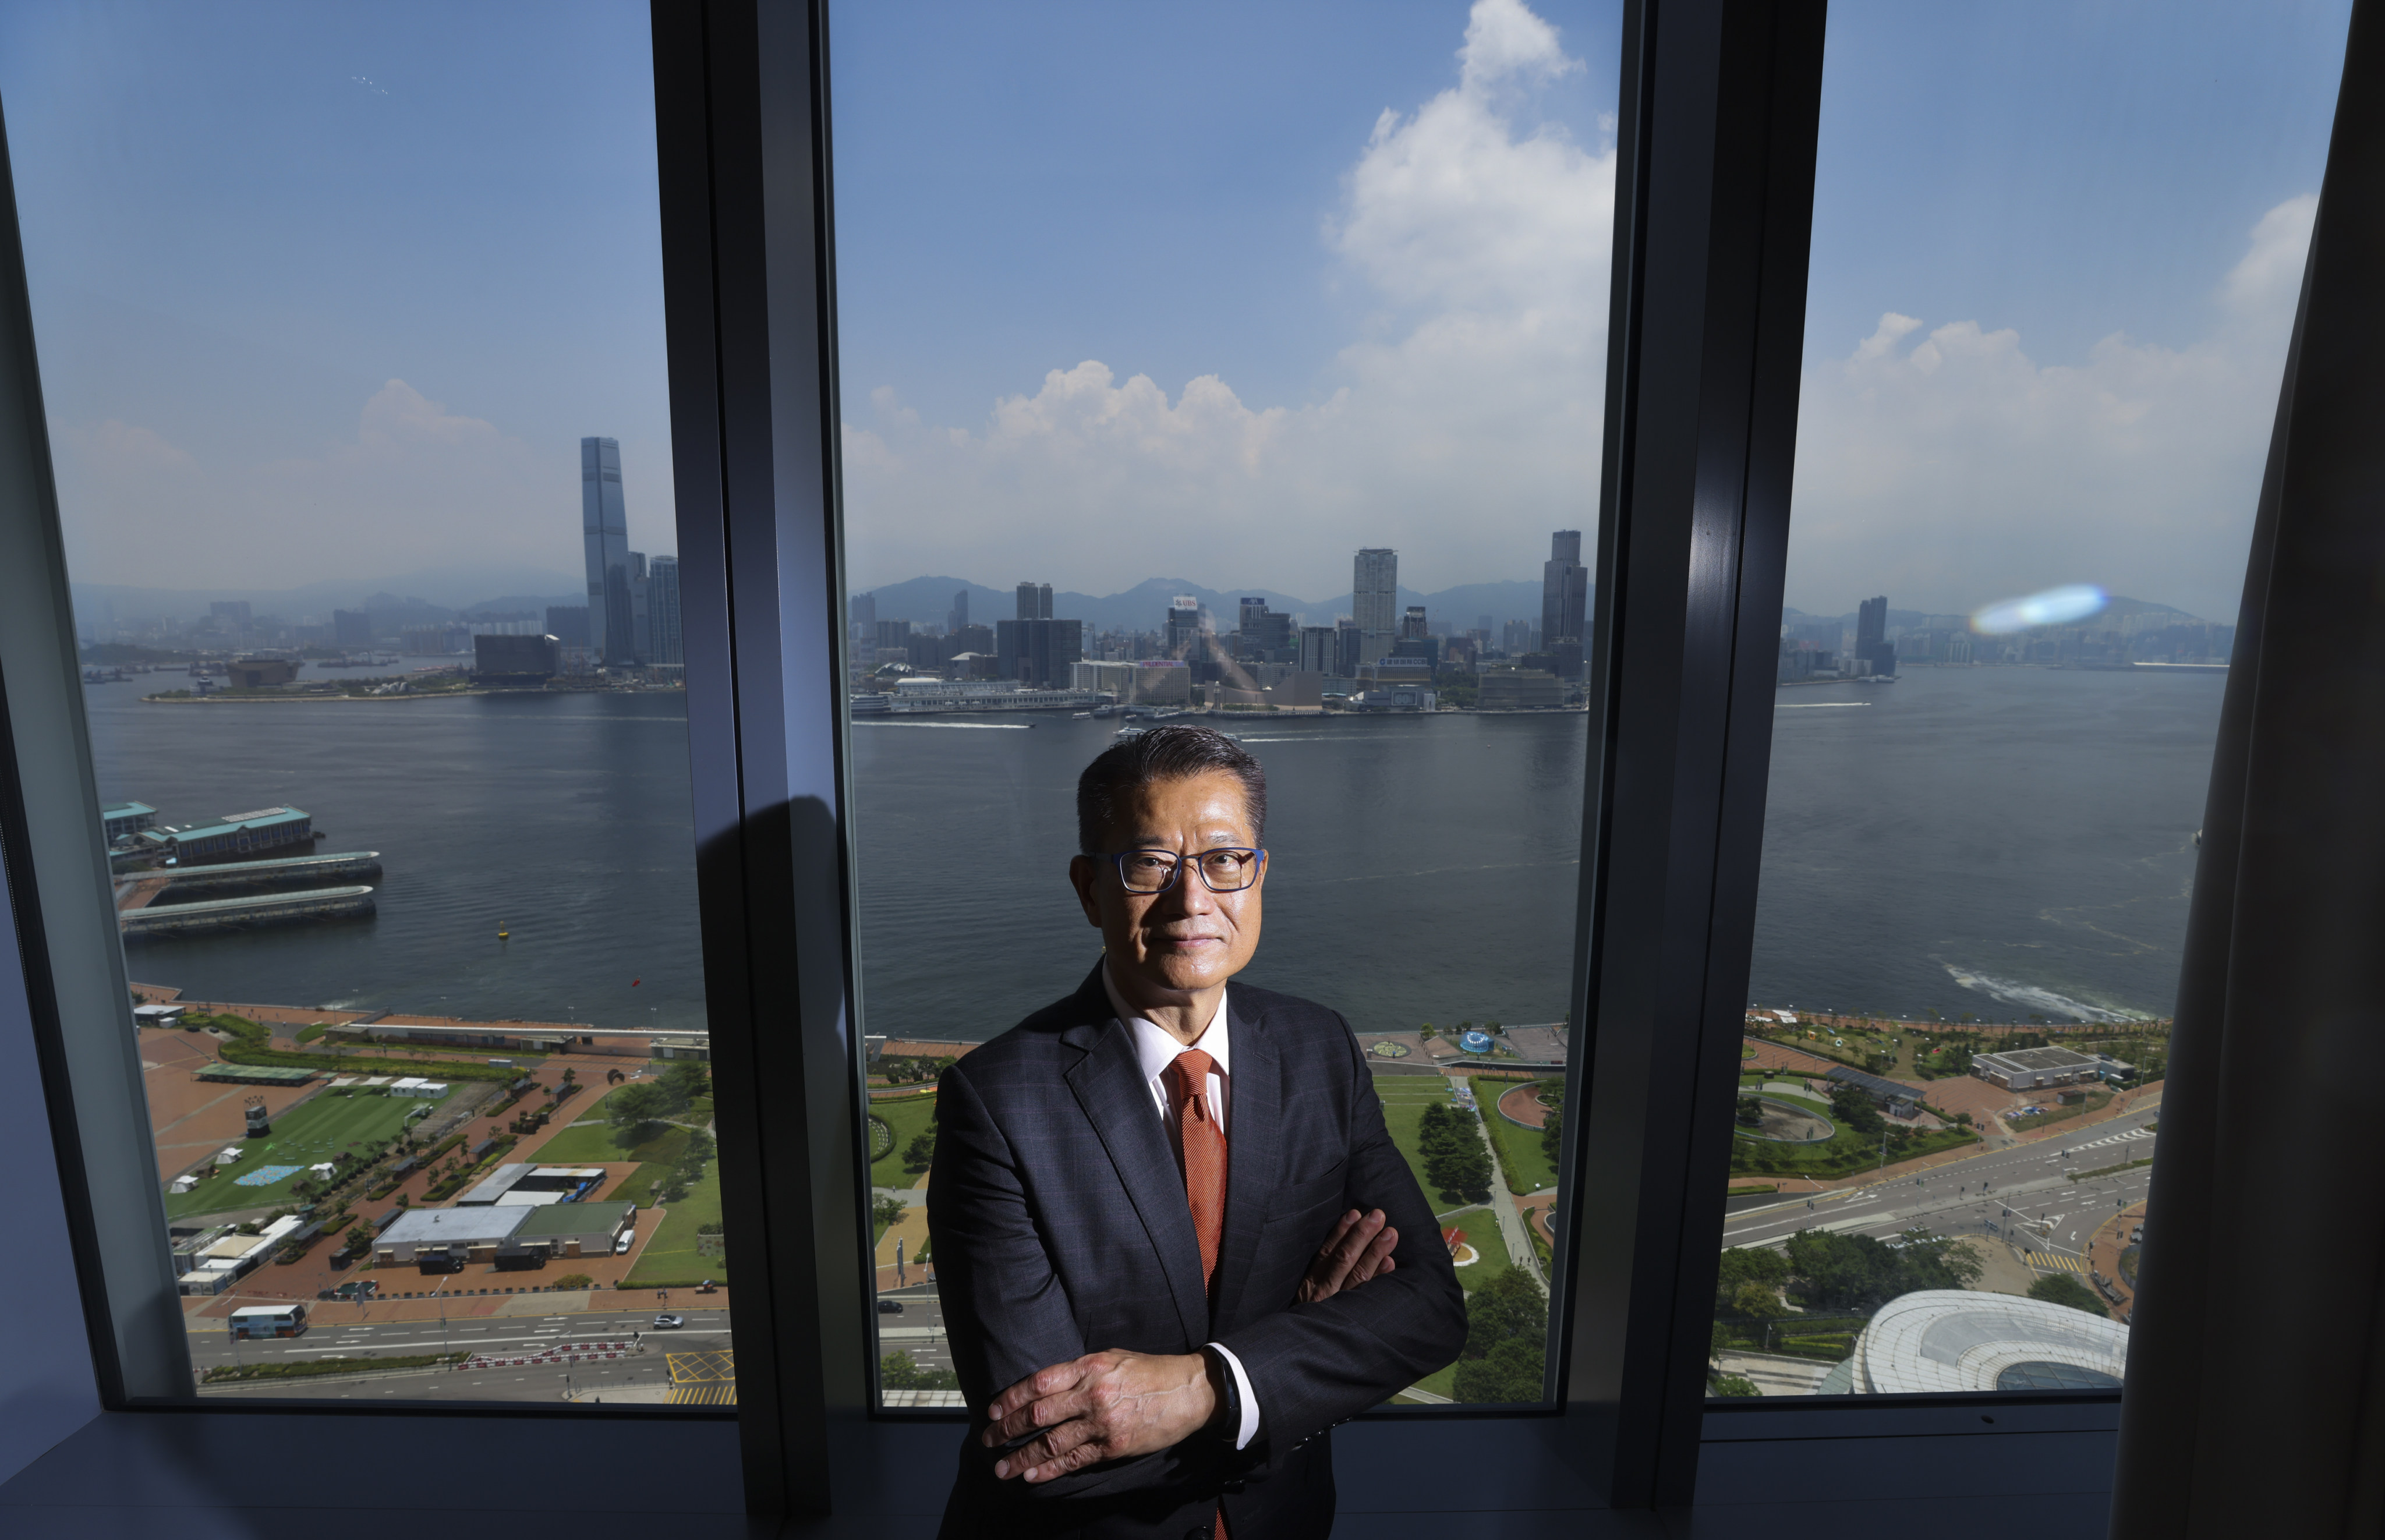 Financial Secretary Paul Chan at government’s headquarters in Admiralty, with the Kowloon skyline in the background, on July 25, 2022. Photo: Nora Tam